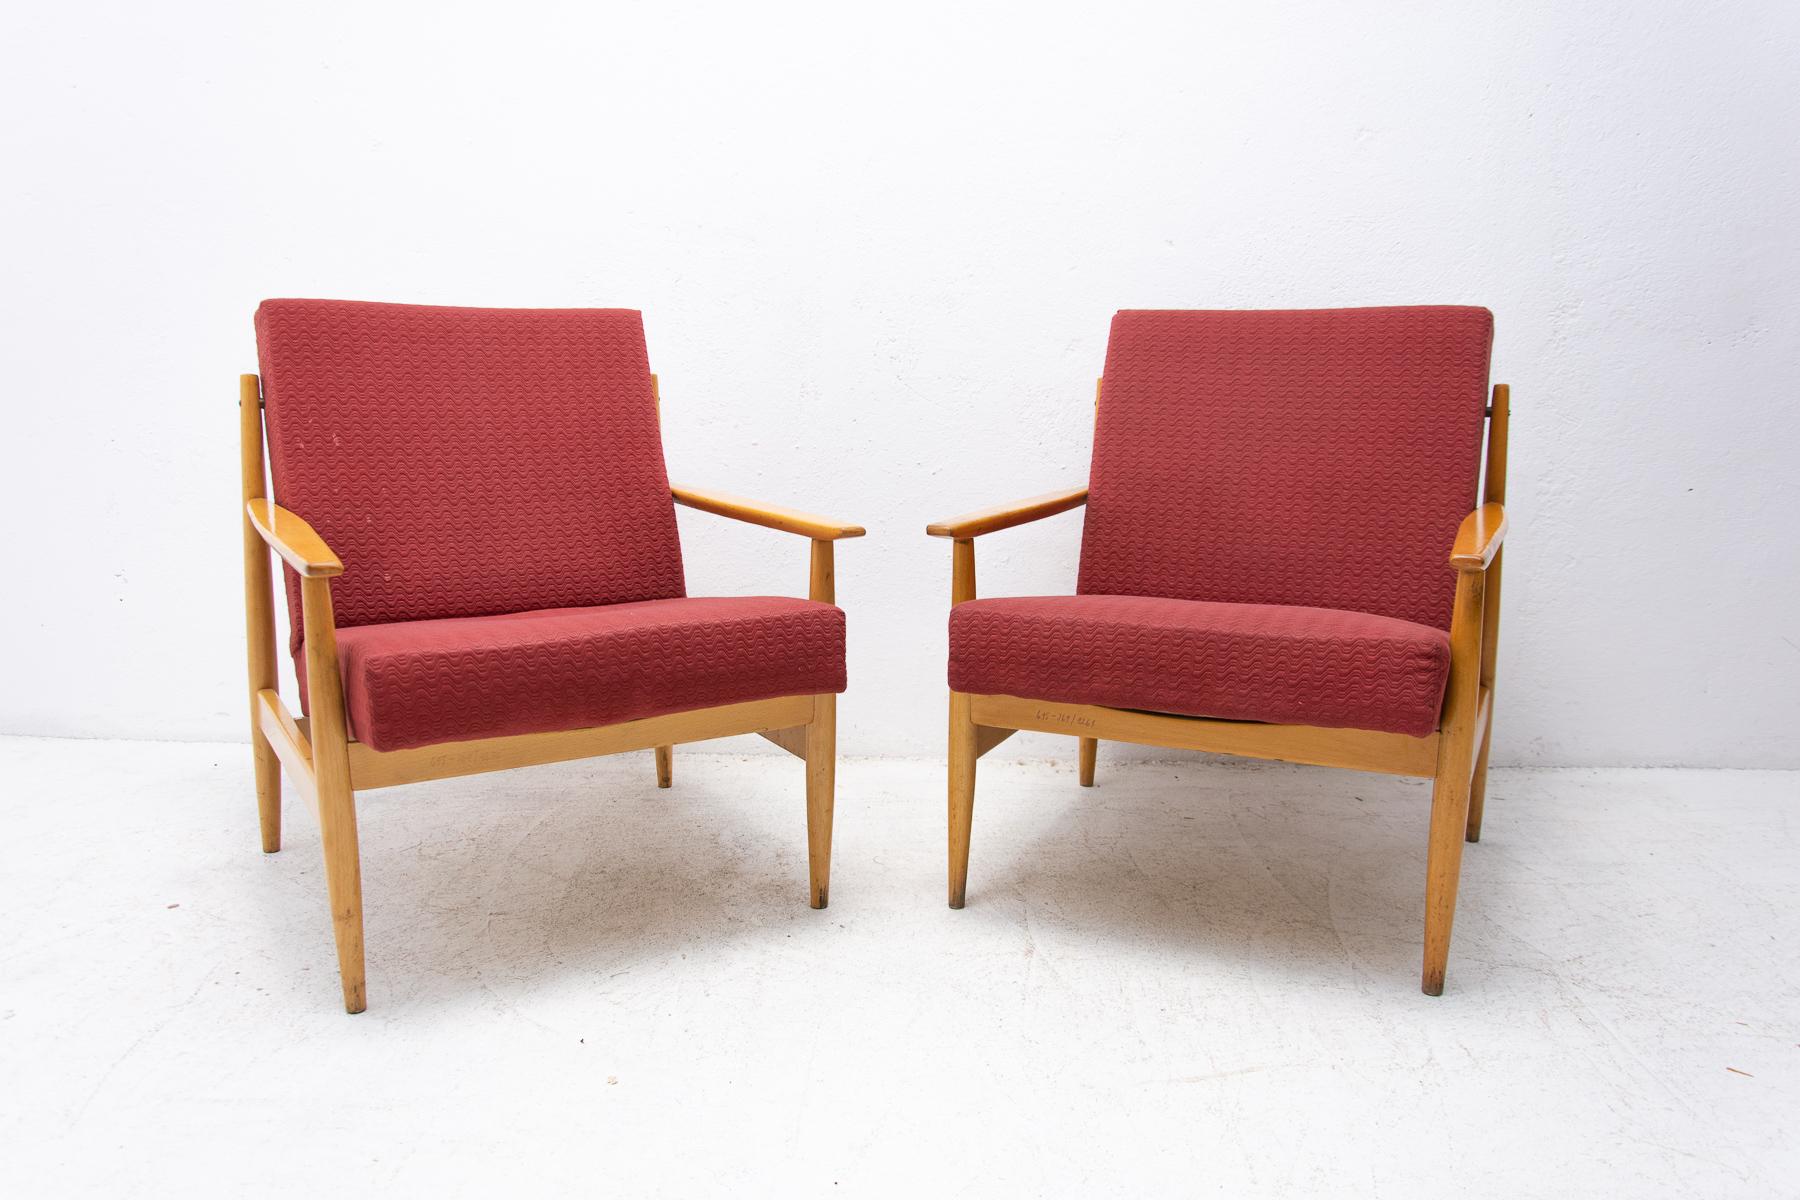 A pair of mid century armchairs in Scandinavian style, made in the former Czechoslovakia by TON company in the 1970´s. It has a beechwood structure and original upholstery in good Vintage condition. The chairs are fully functional, showing signs of